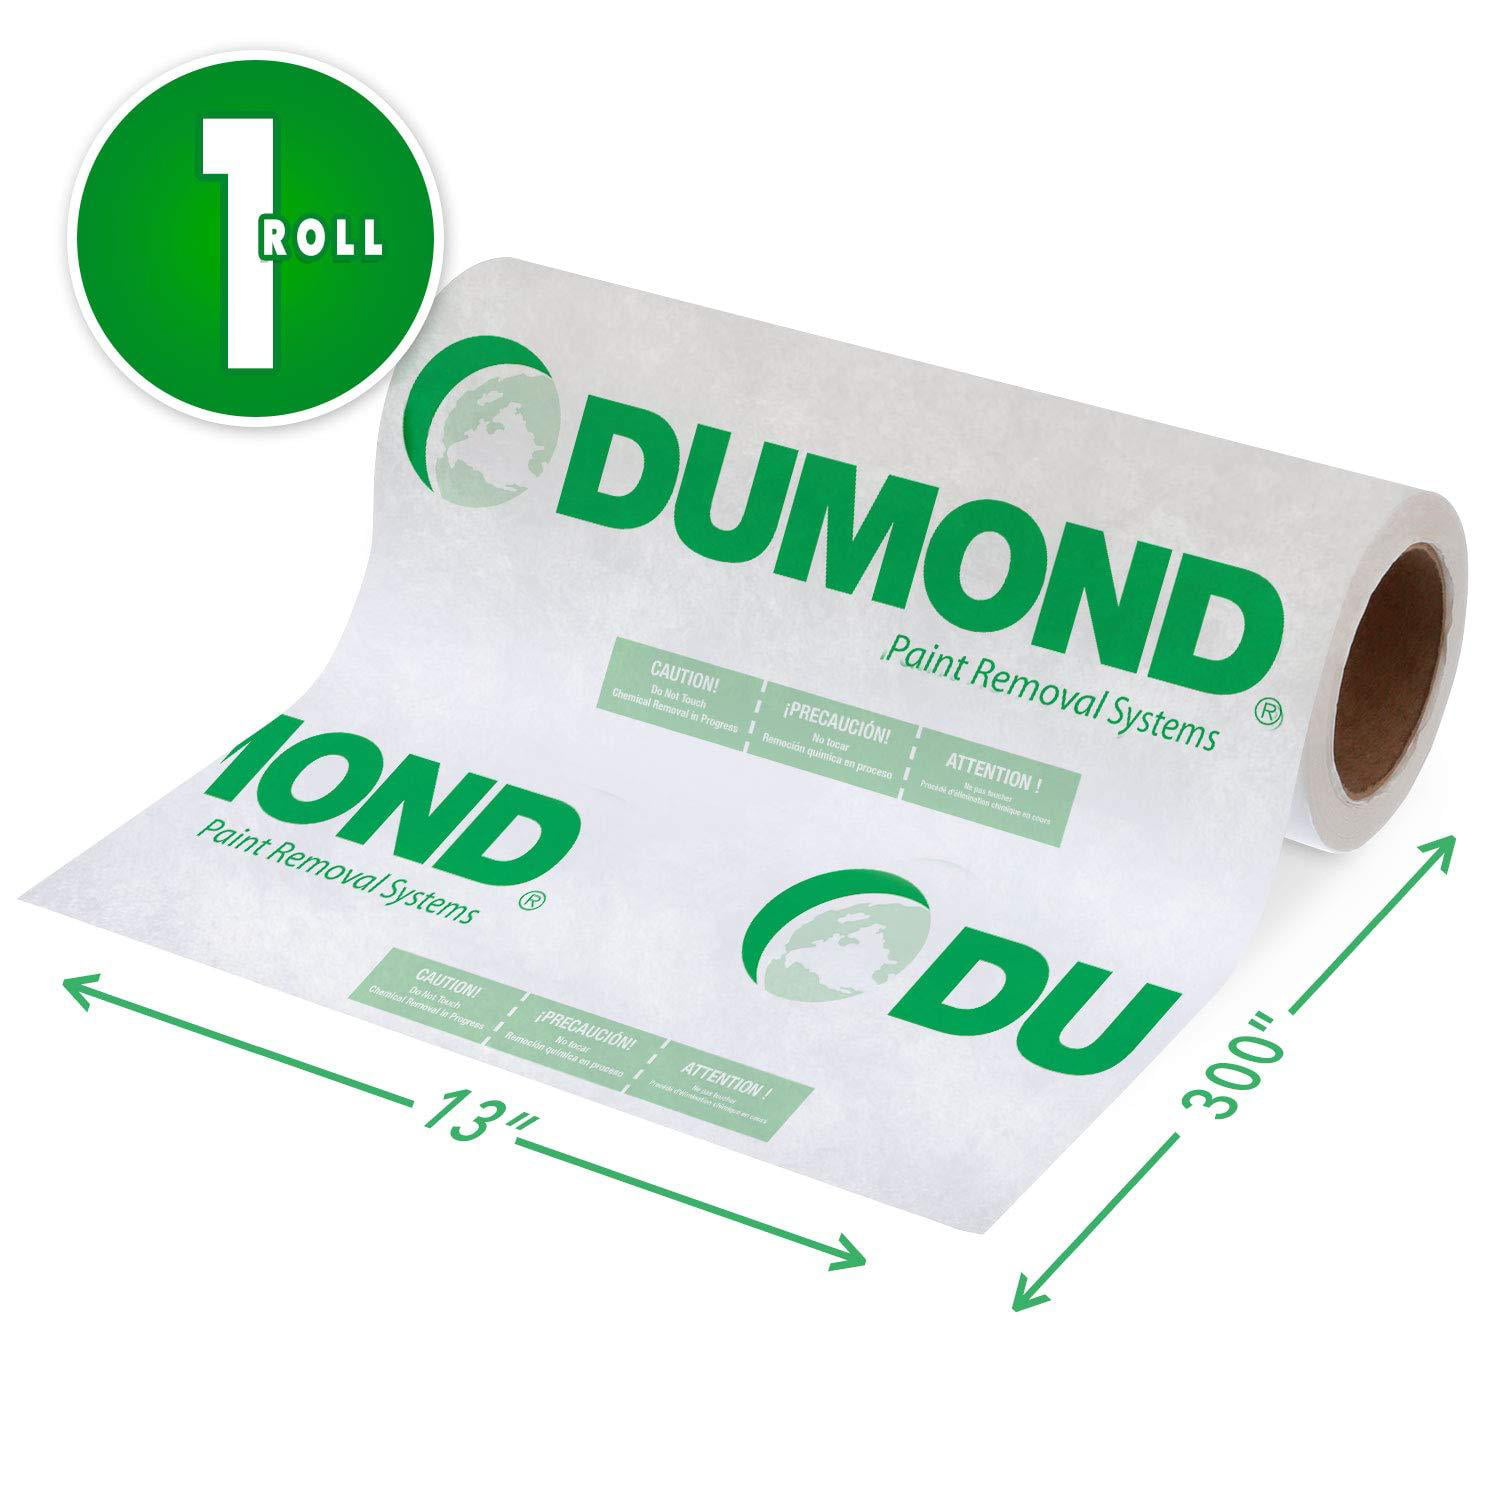 PEEL AWAY Laminated Paper 3 Pk 1023 Lead Paint Removal New 2 DUMOND Chemicals 